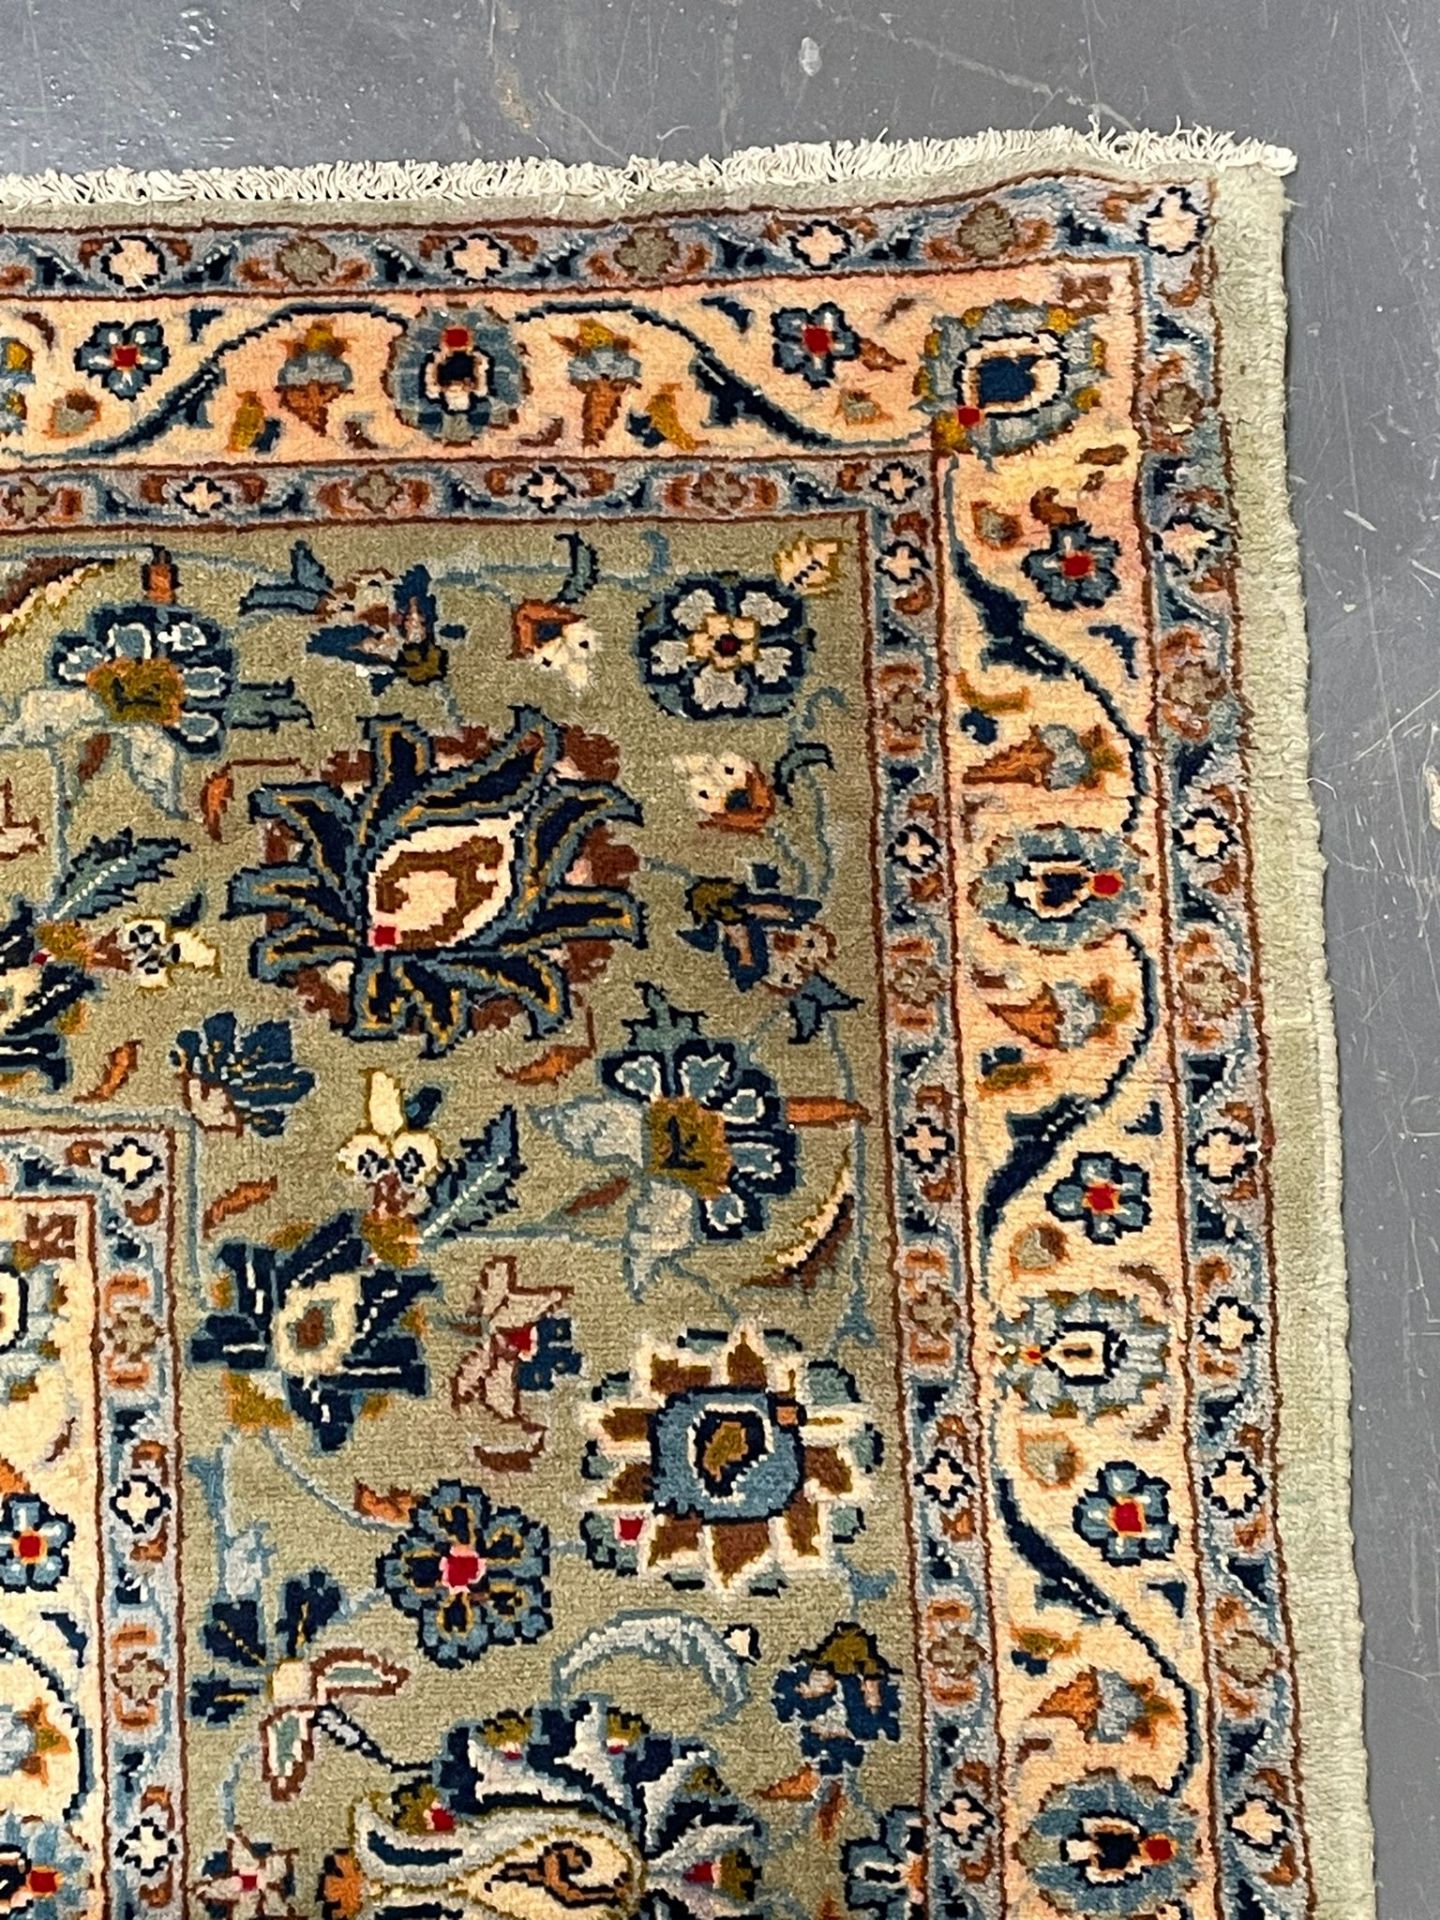 EARLY 20TH CENTURY CENTRAL PERSIAN KASHAN CARPET RUG - Image 3 of 5